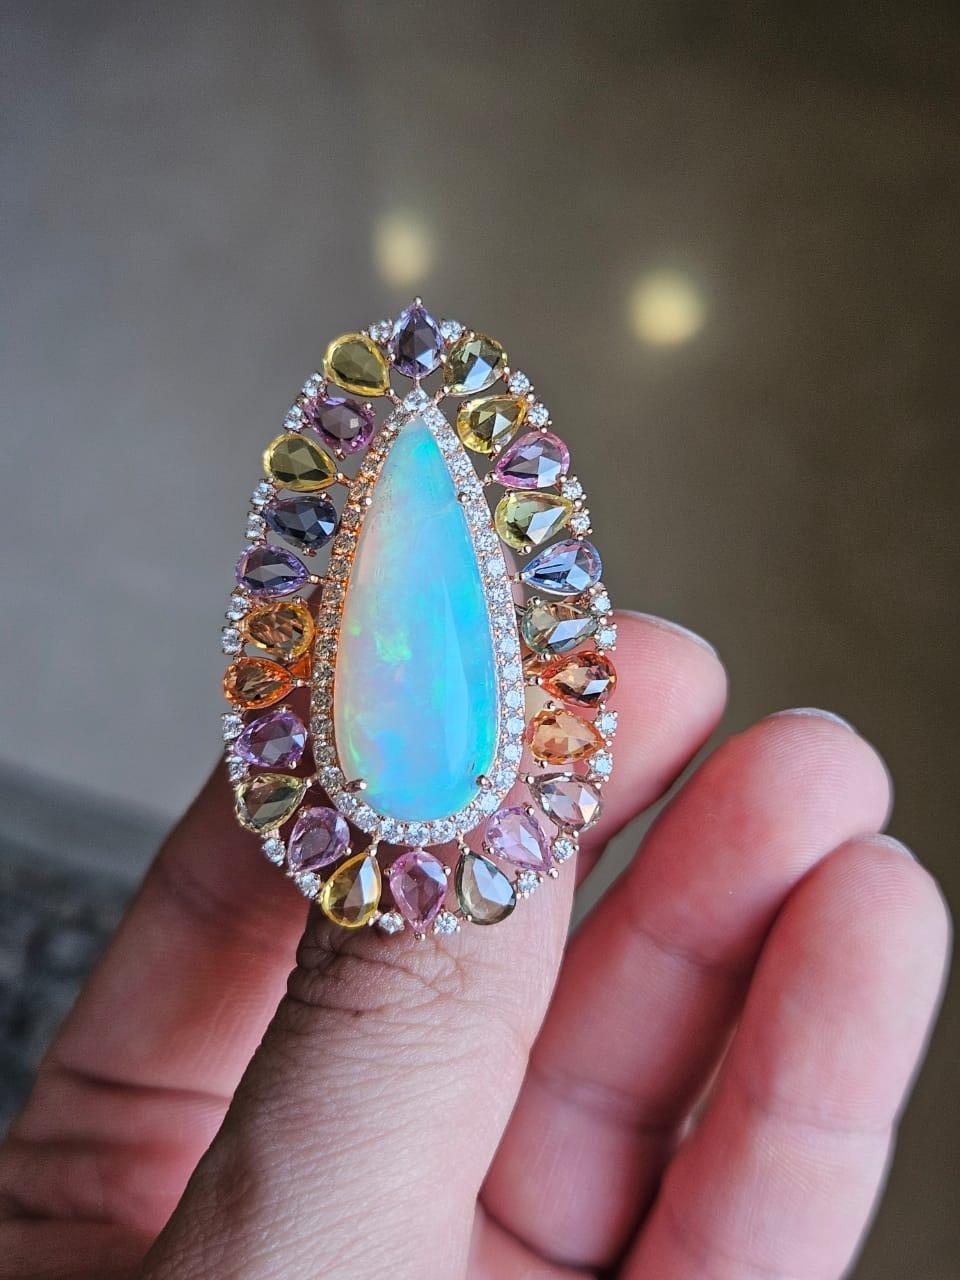 A very gorgeous and beautiful, one of a kind, Opal & Multi Sapphires Cocktail Ring set in 18K Gold & Diamonds. The weight of the pear shaped Opal Cabochon is 10.05 carats. The Opal cabochon is of Ethiopian origin. The weight of the Multi Sapphires